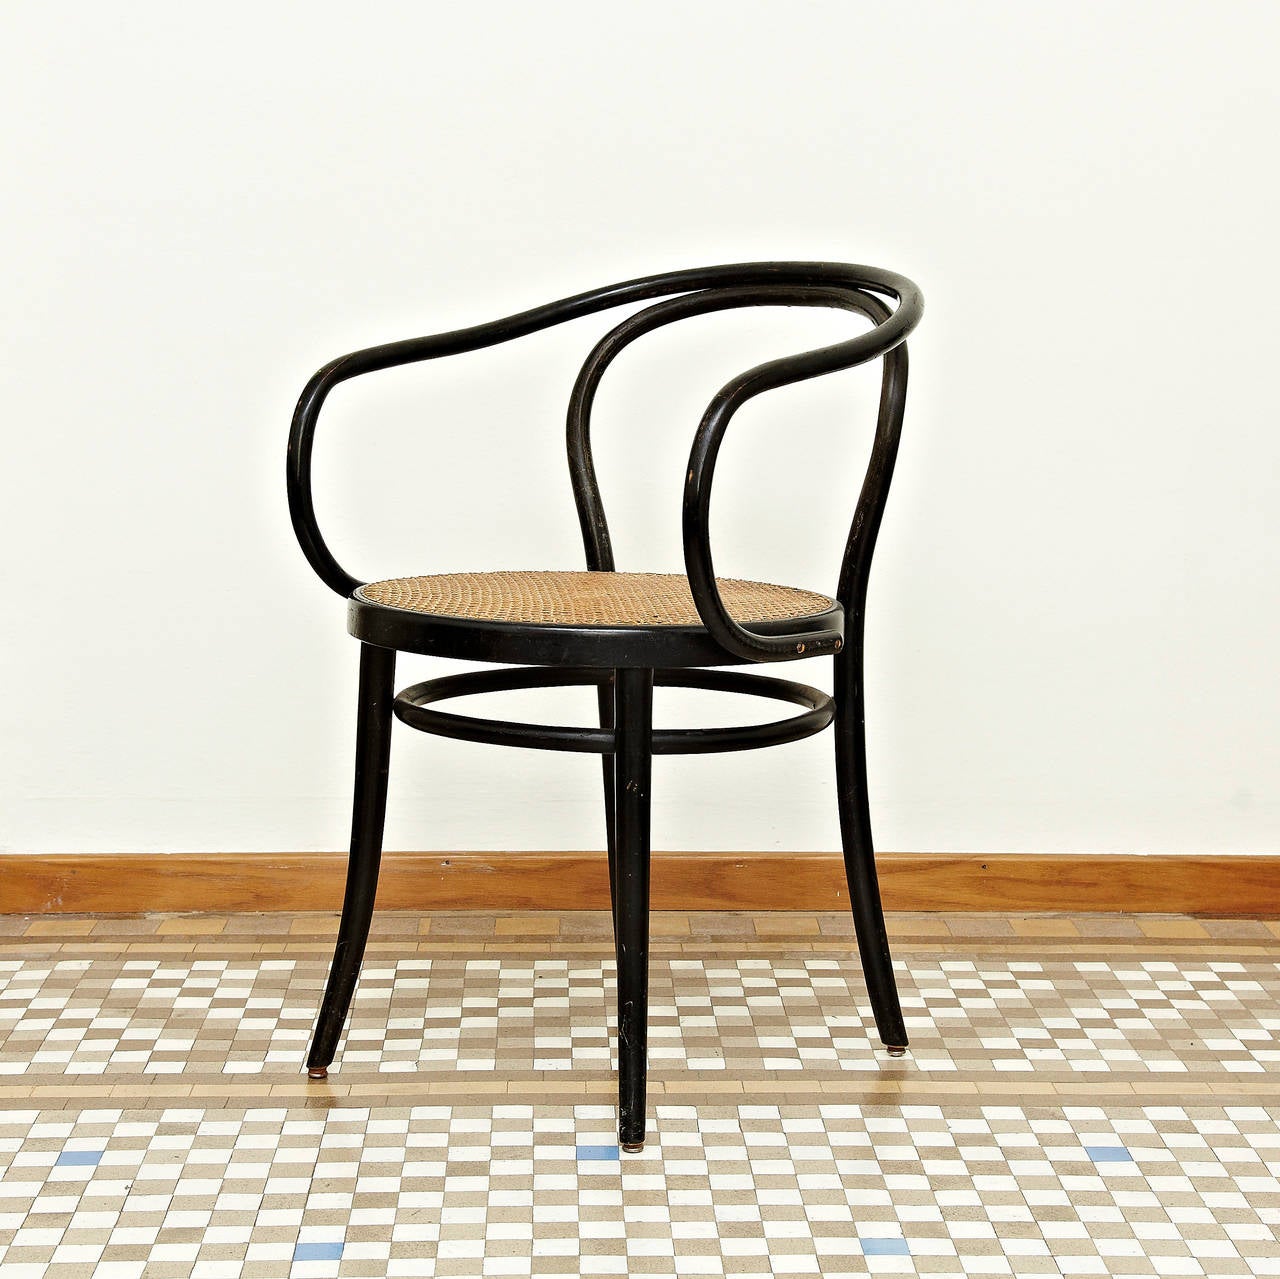 Set of Four Chairs, model 209 designed by Auguste Thonet, circa 1890. 
Manufactured by Thonet around 1950. 

Thonet 209 chair dates back to the beginning of the 20th century. The frame is made from a single item of solid black lacquered beech